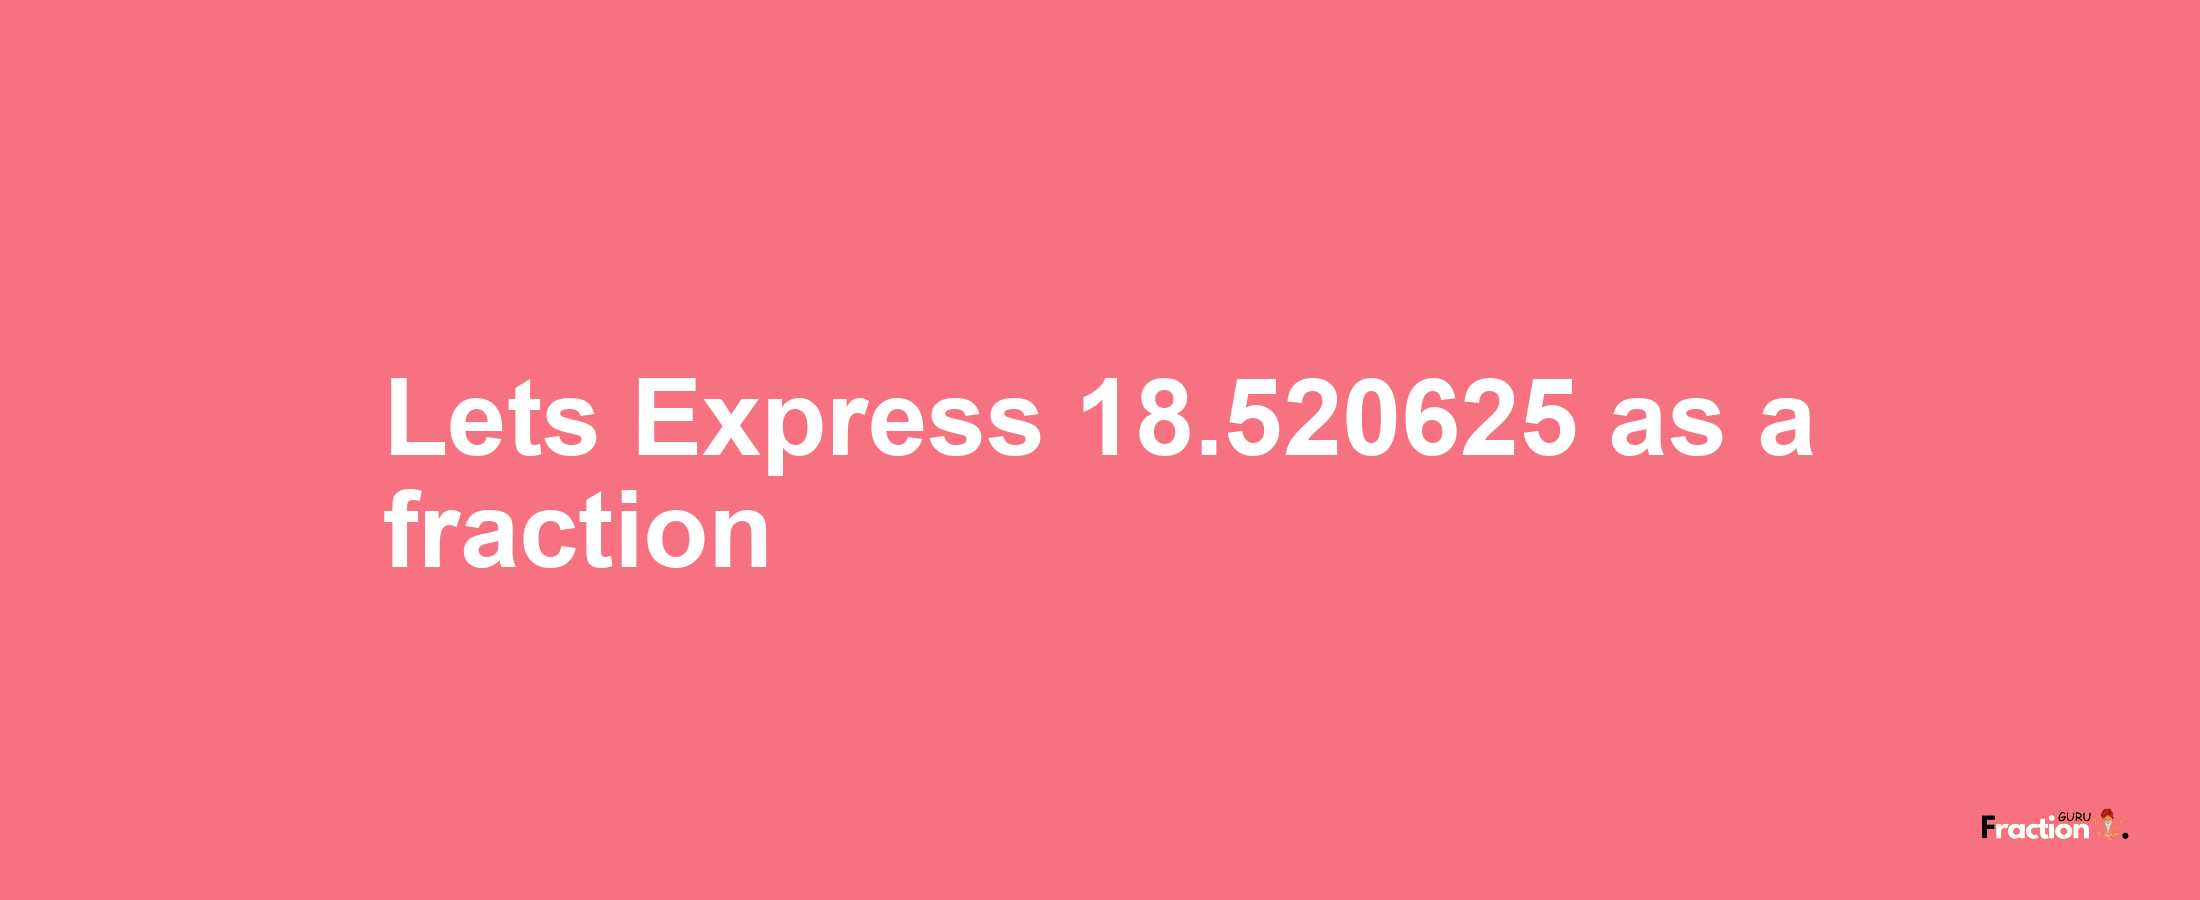 Lets Express 18.520625 as afraction